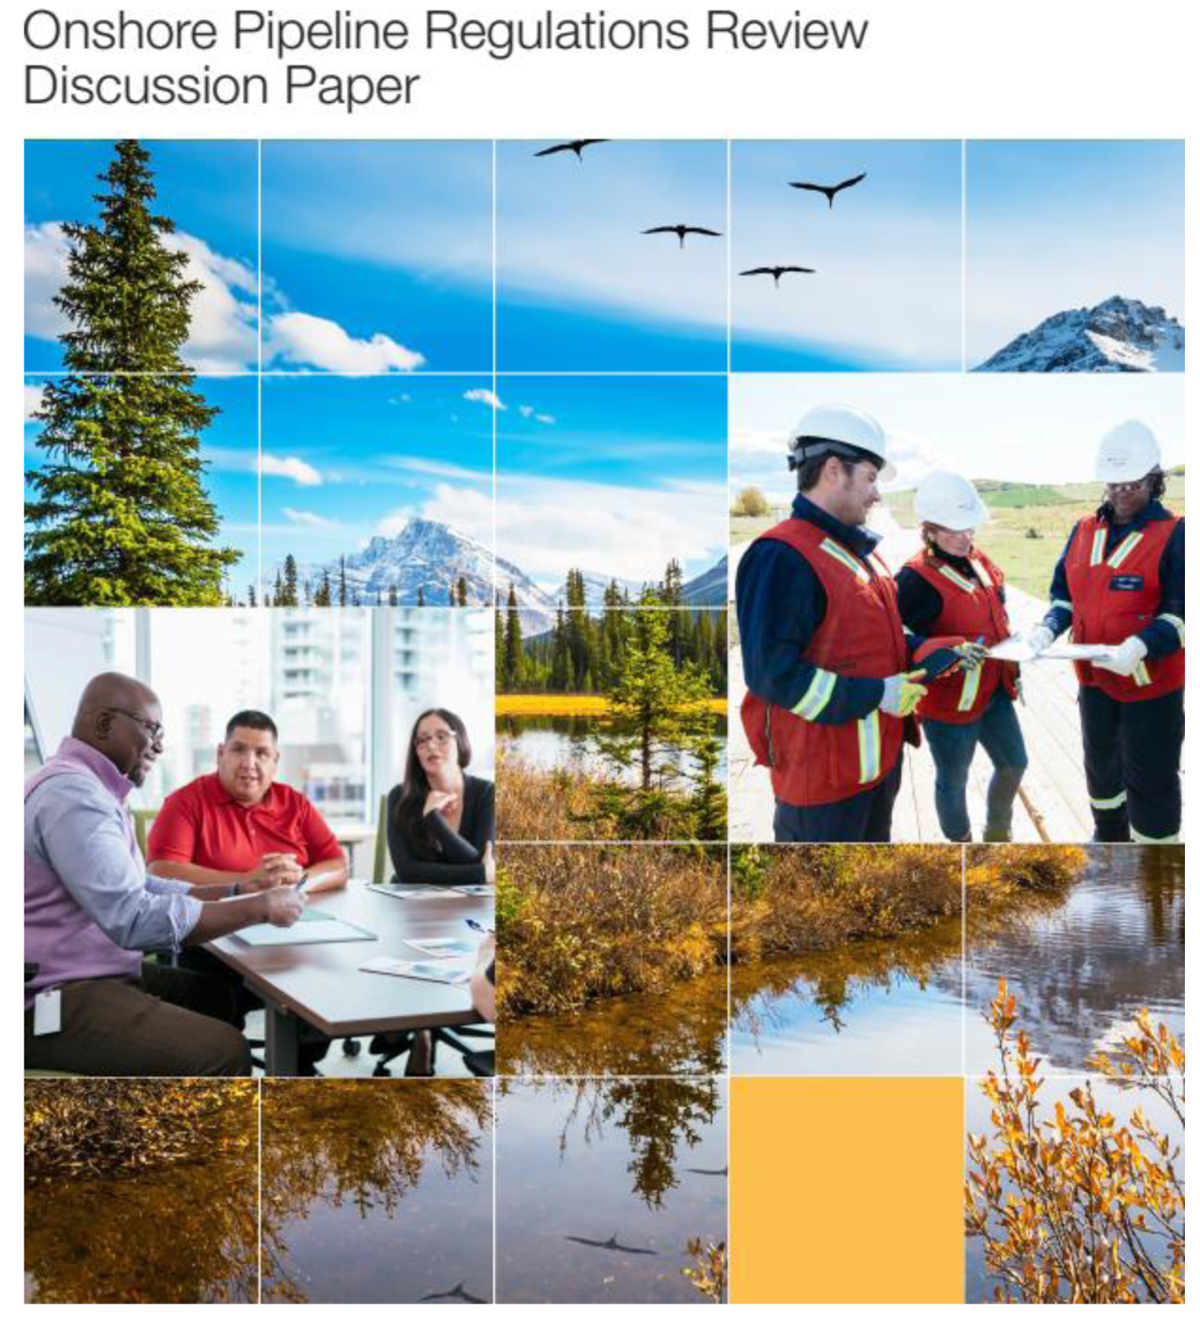 Cover of the OPR Discussion Paper